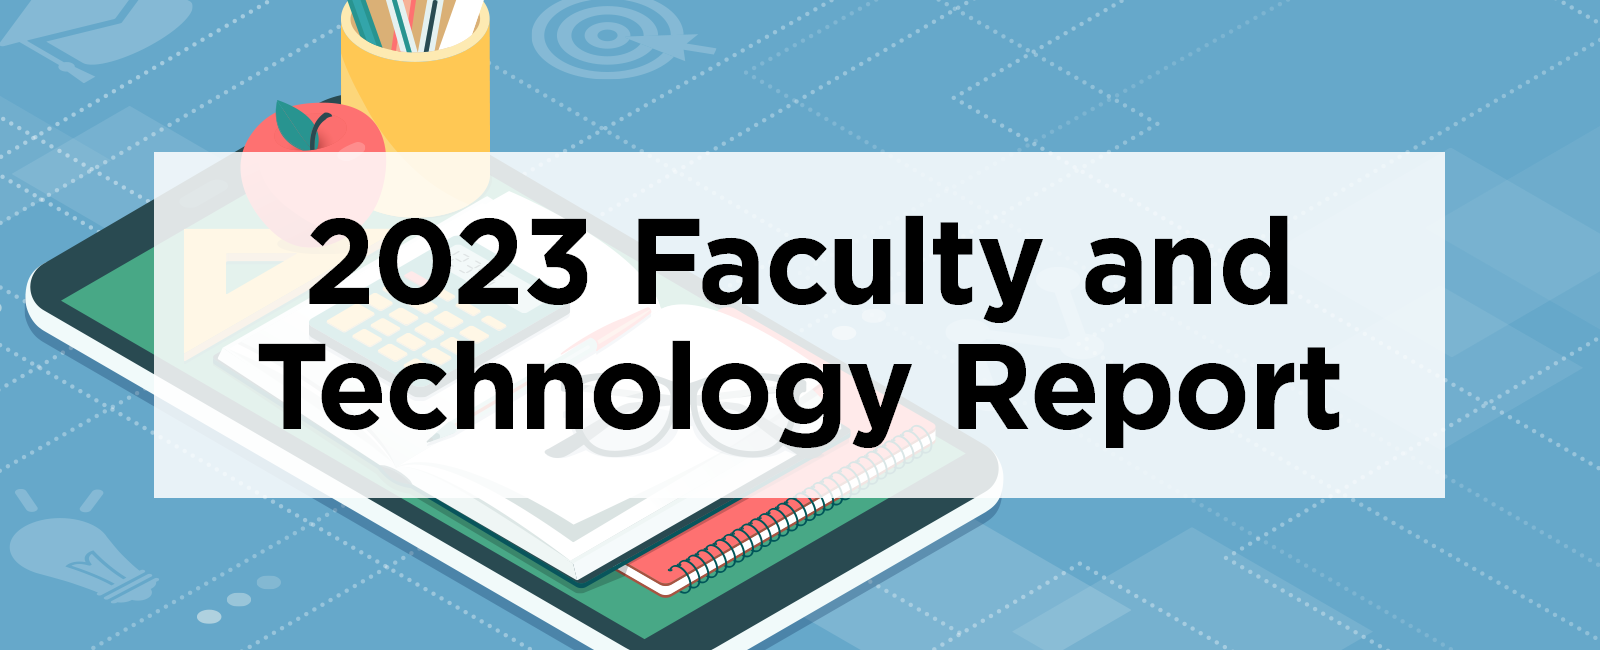 2023 Faculty and Technology Report: A First Look at Teaching Preferences since the Pandemic